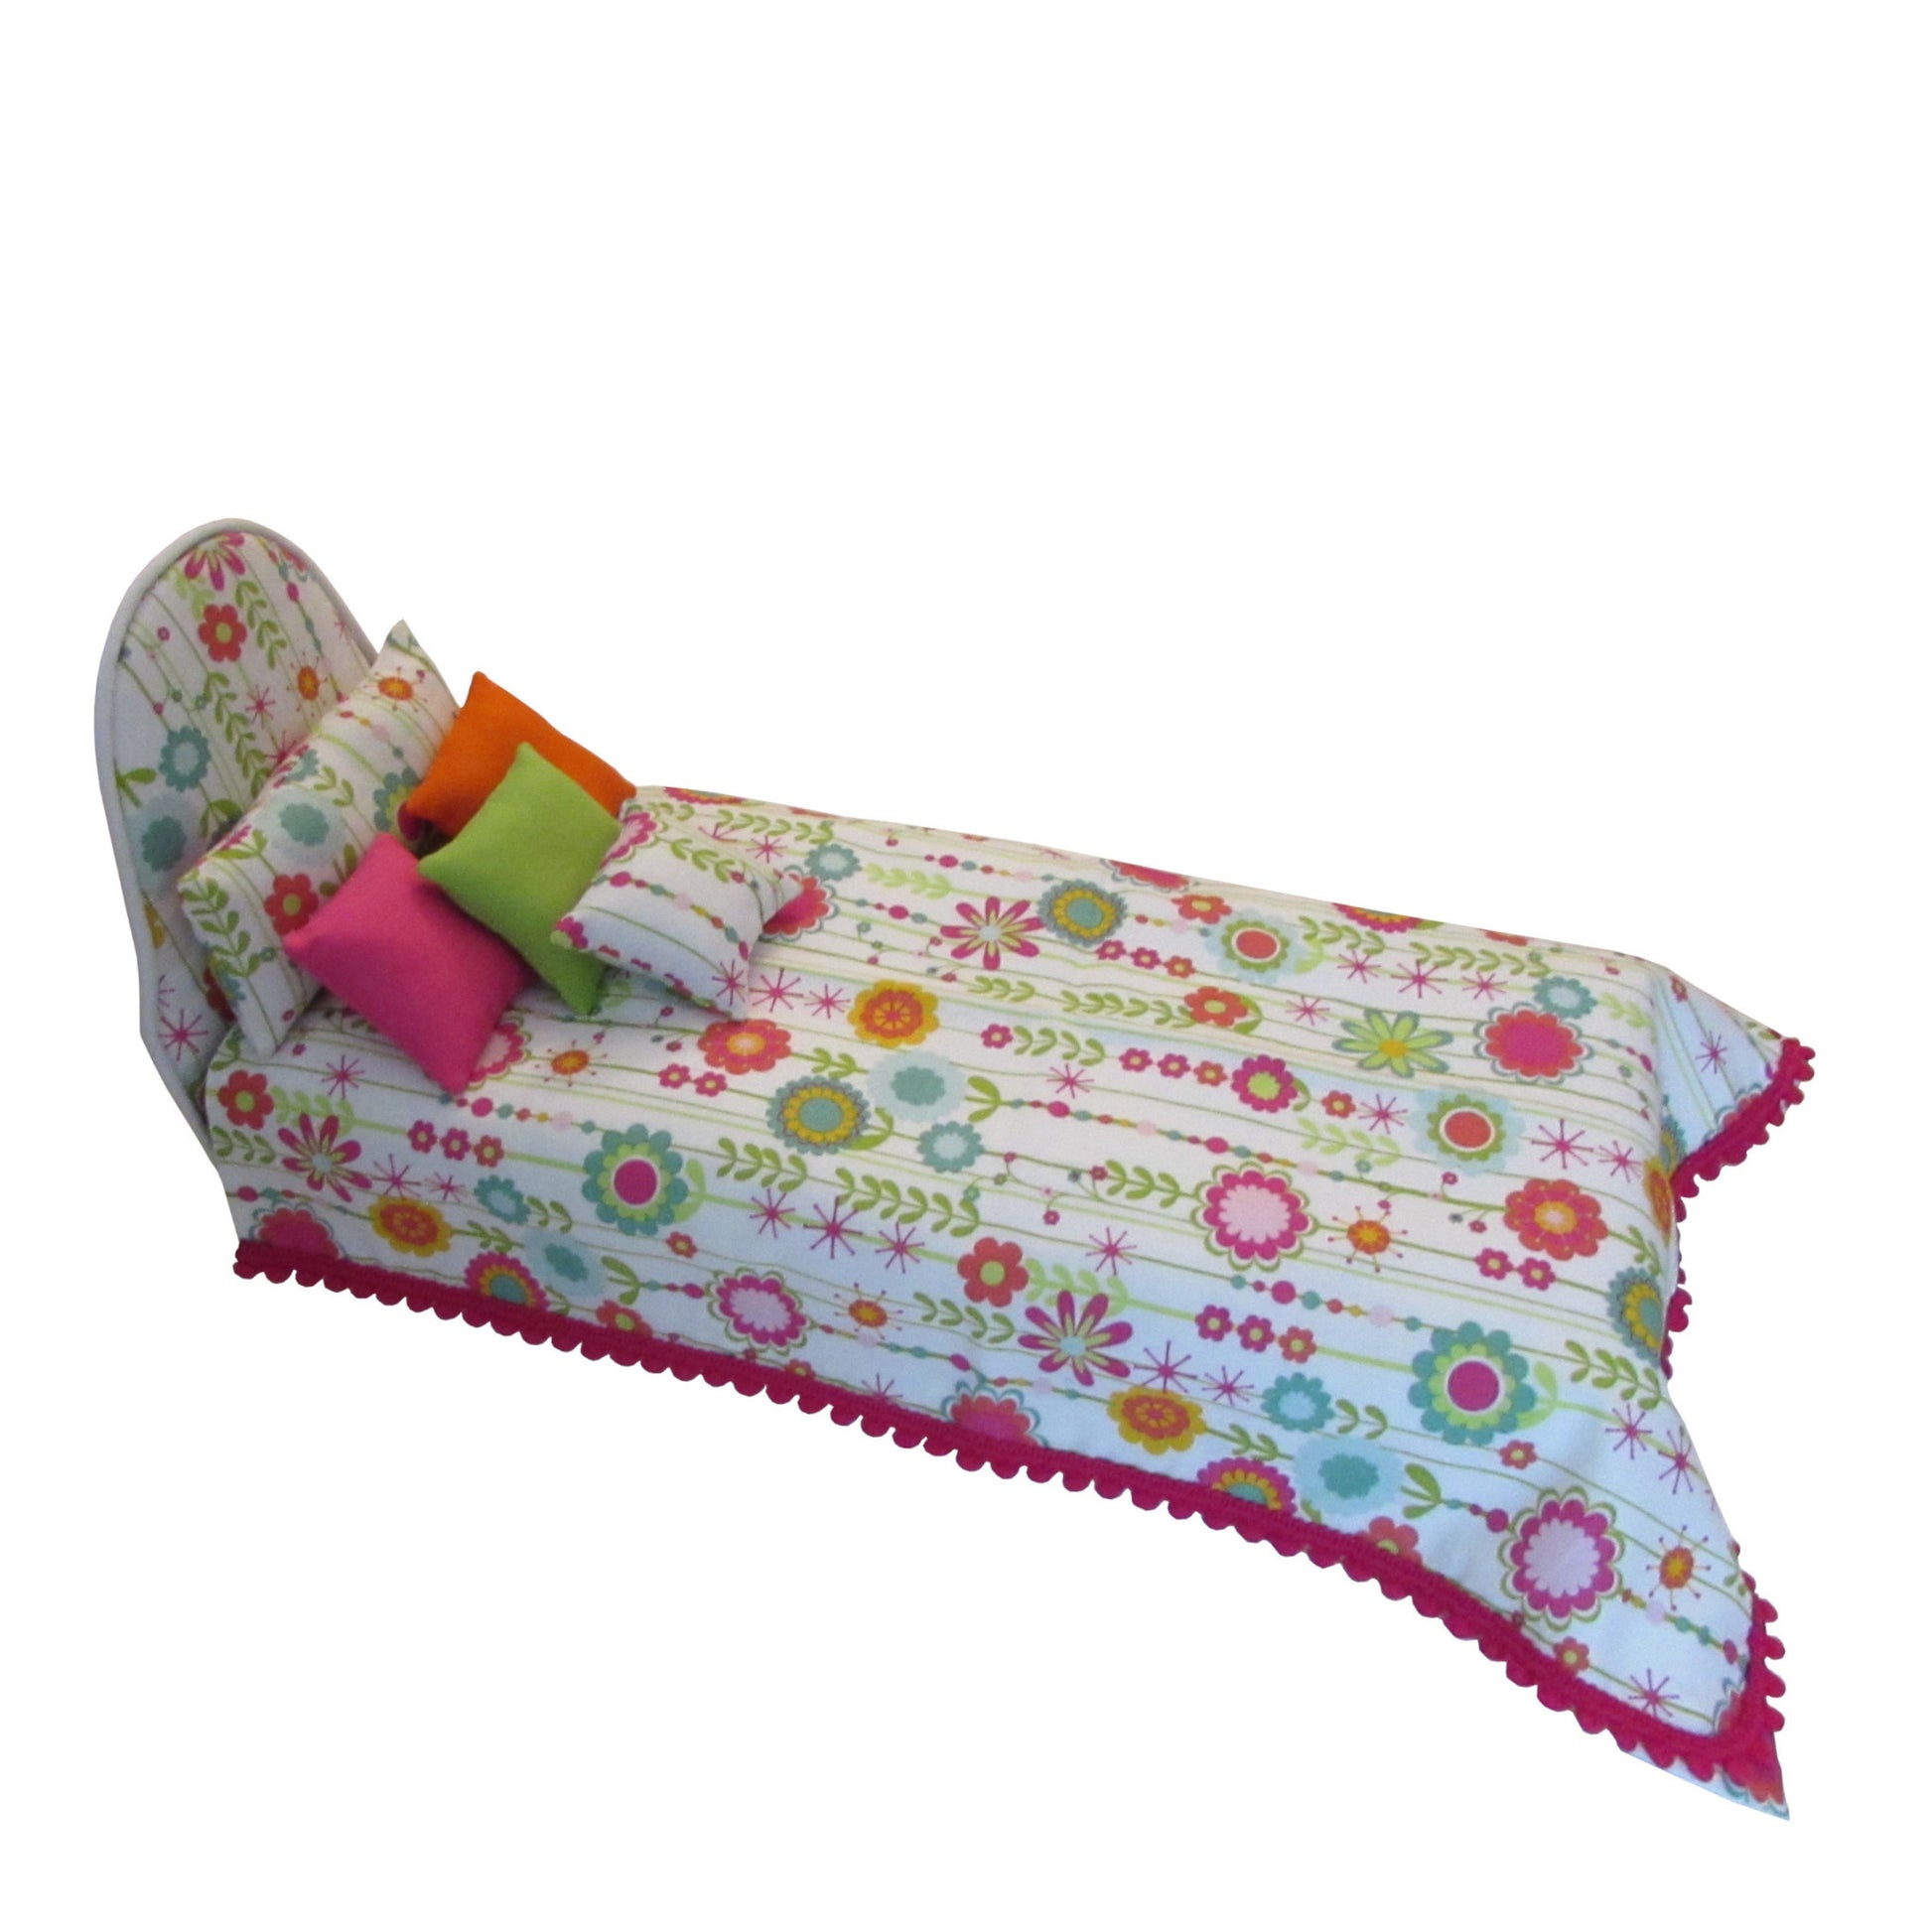 White Upholstered Doll Bed and Floral Bedding for 11.5-inch and 12-inch dolls